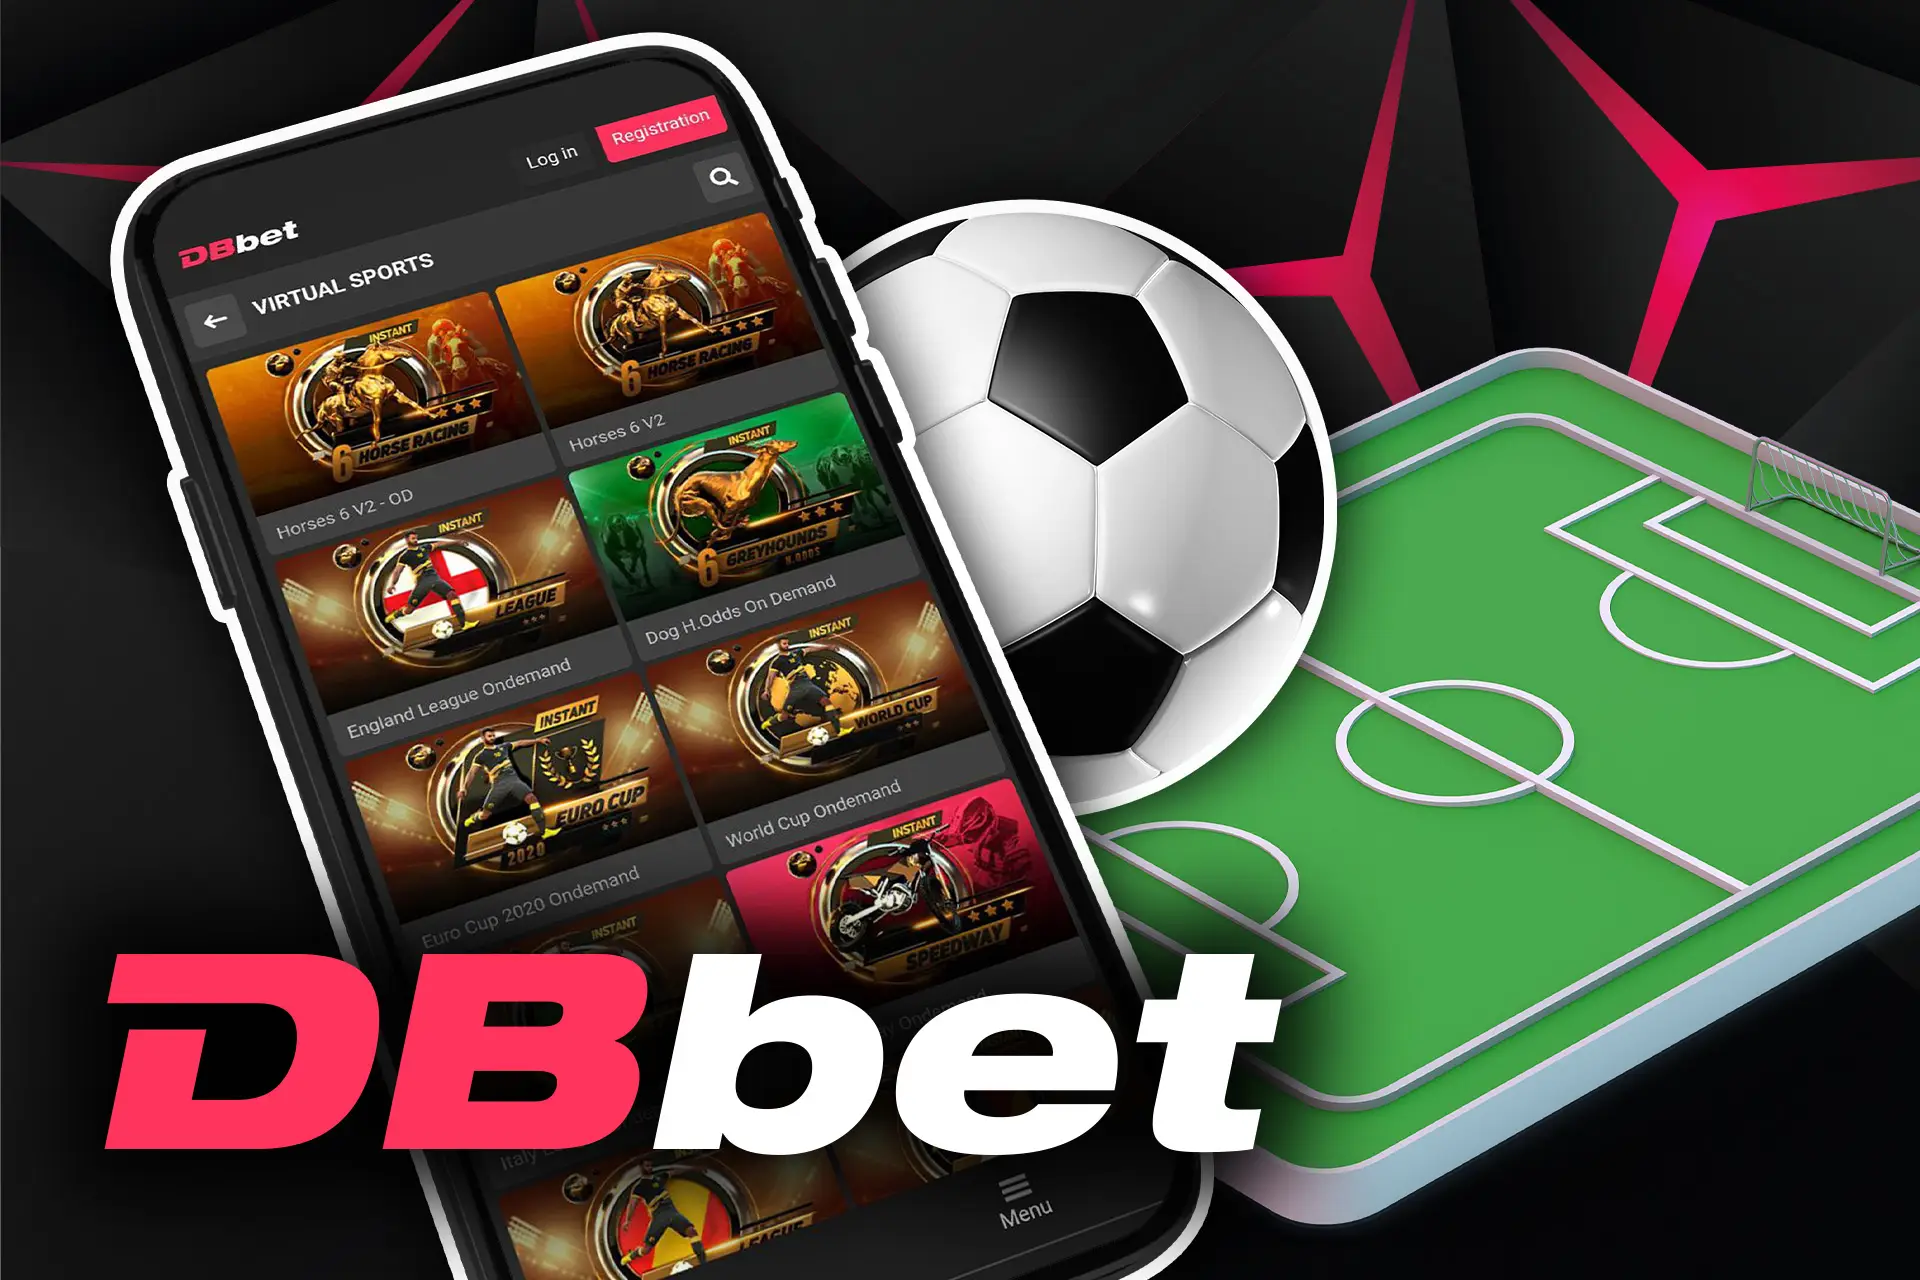 In the DBbet app, bet on virtual sports.